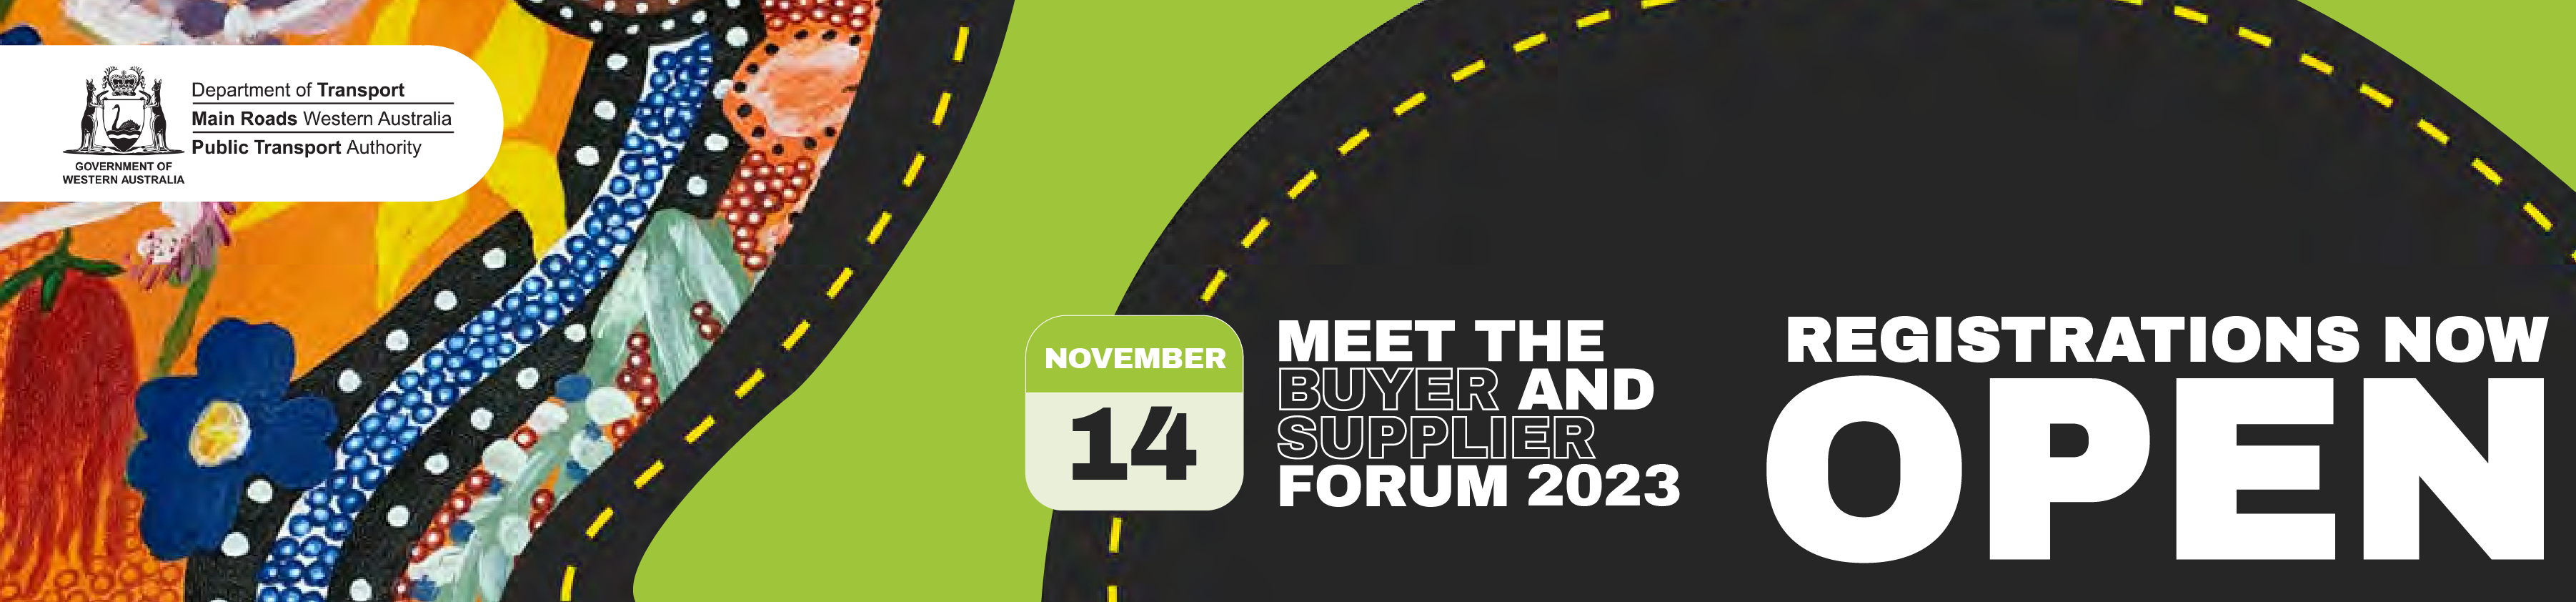 Meet the Buyer and Supplier Forum - Registrations open graphic  